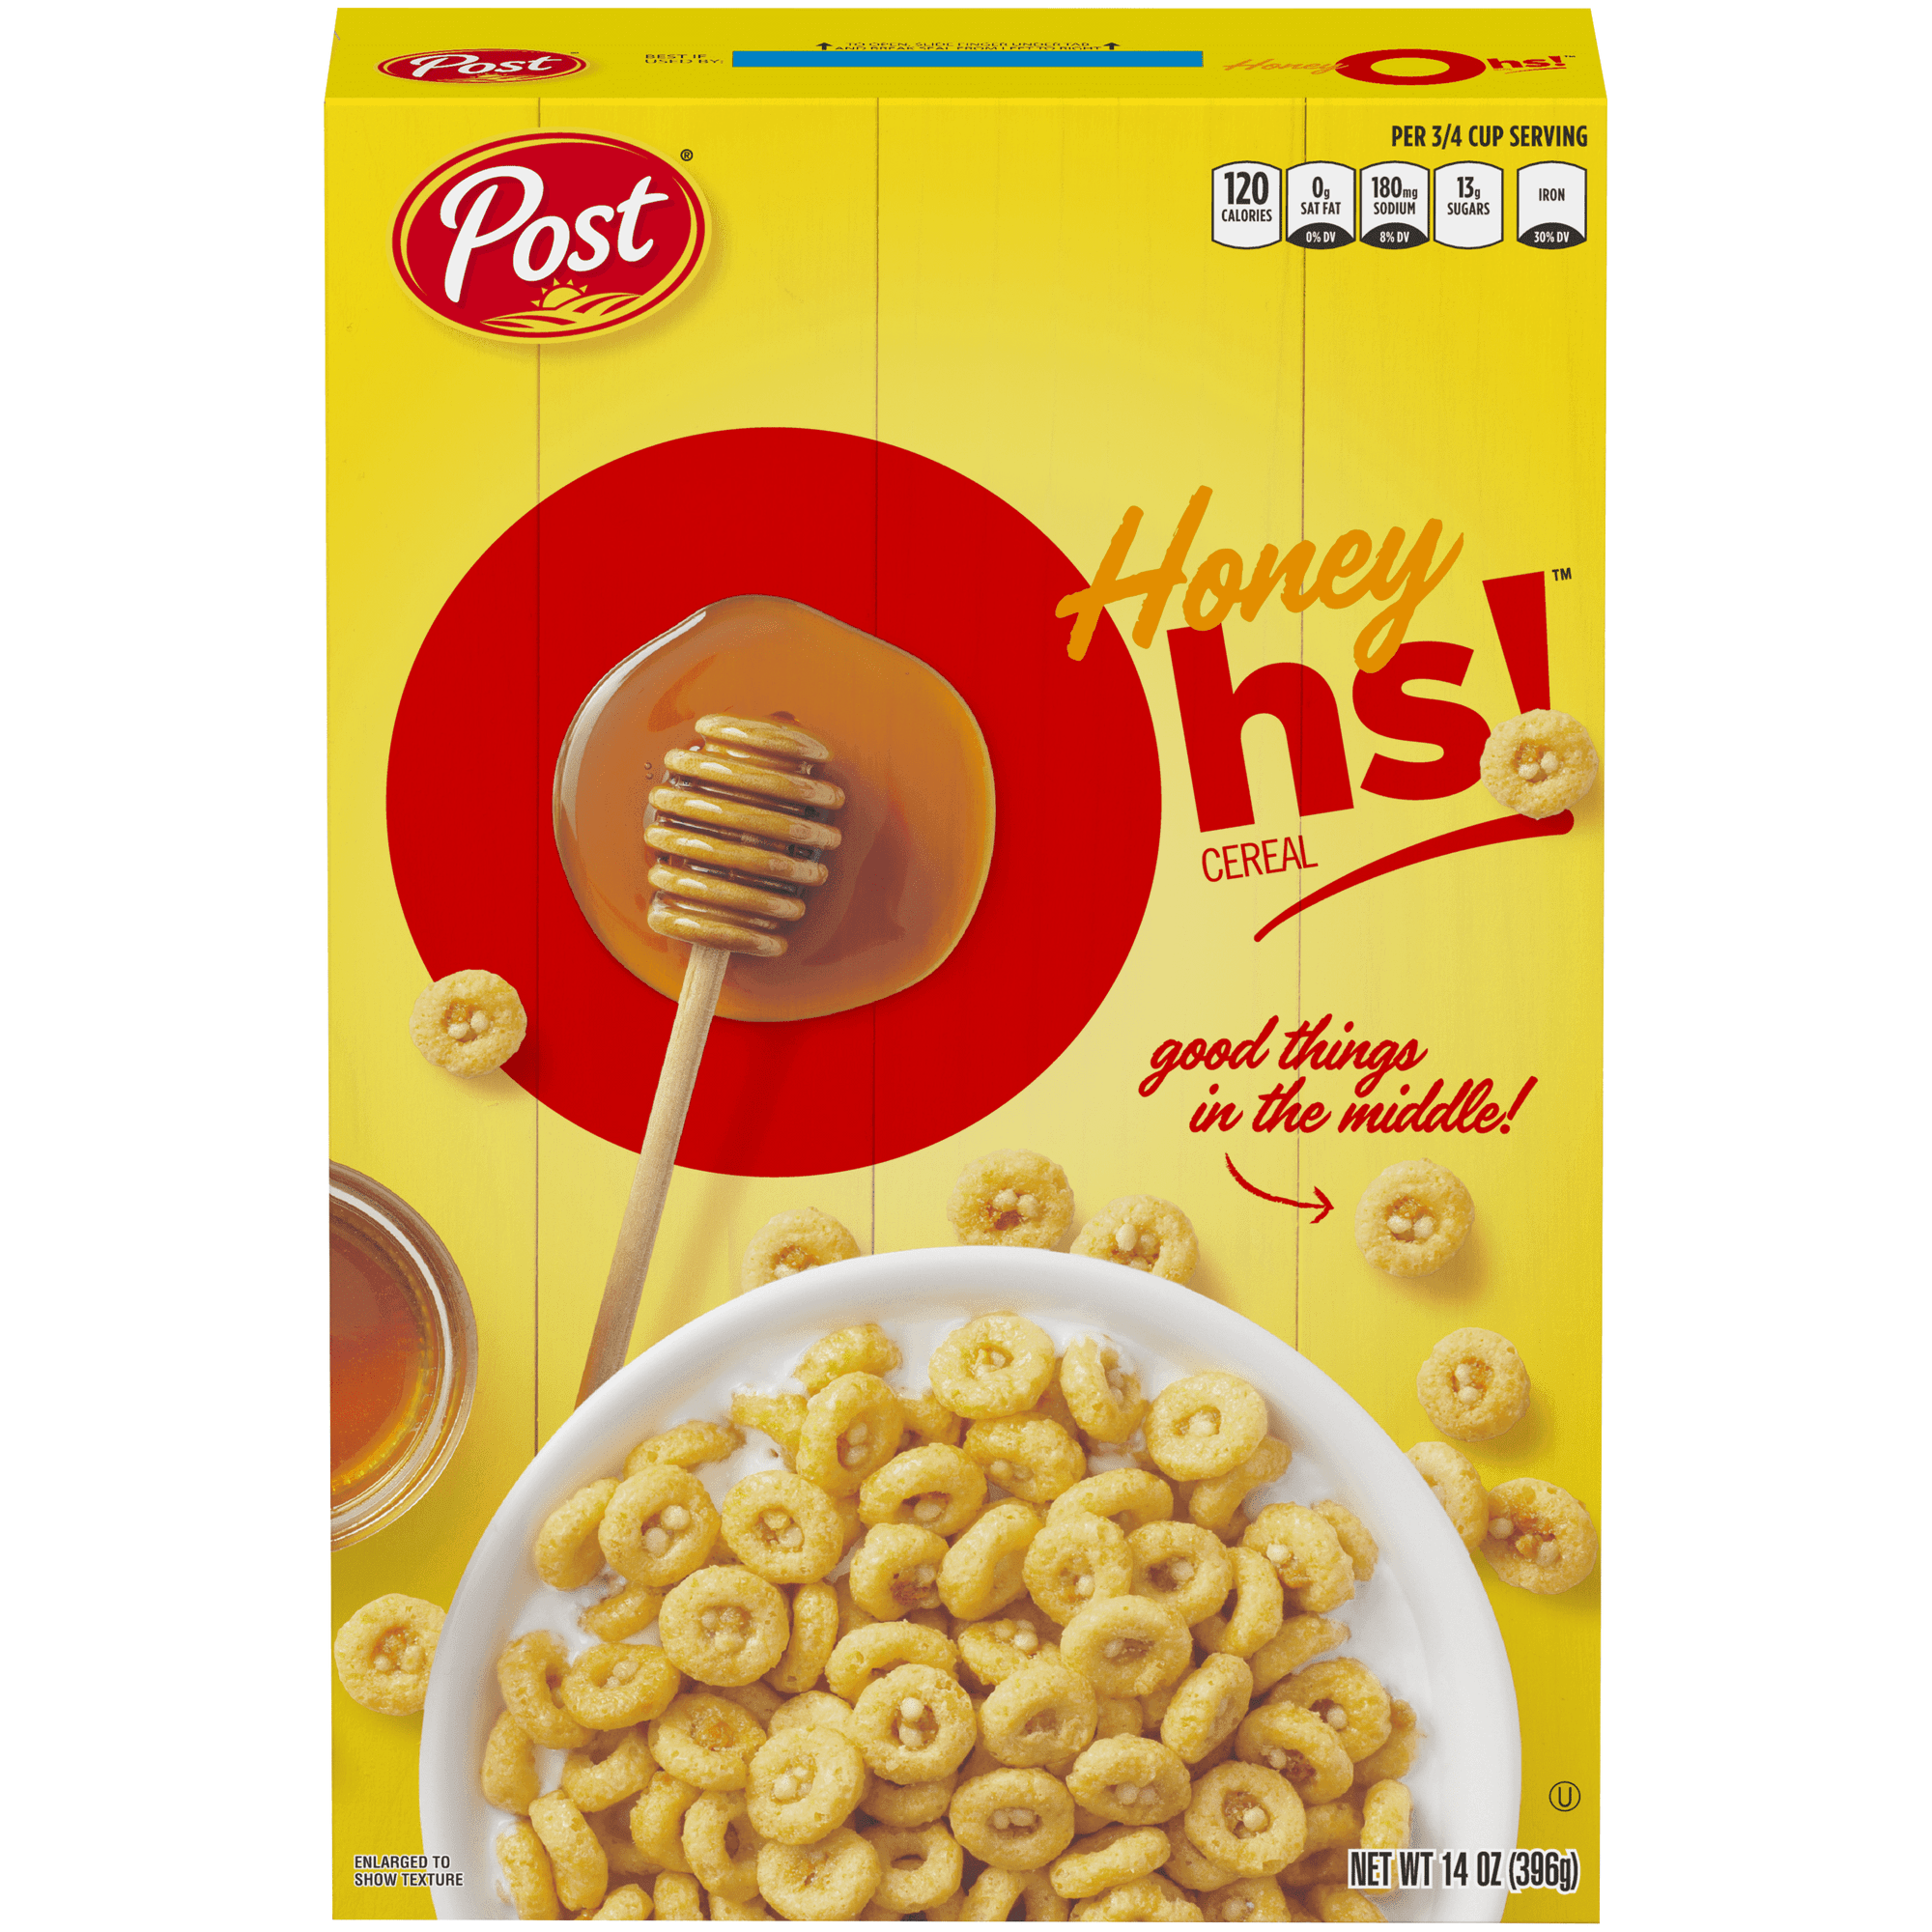 Post Honey Oh's! Cereal, 20 Oz